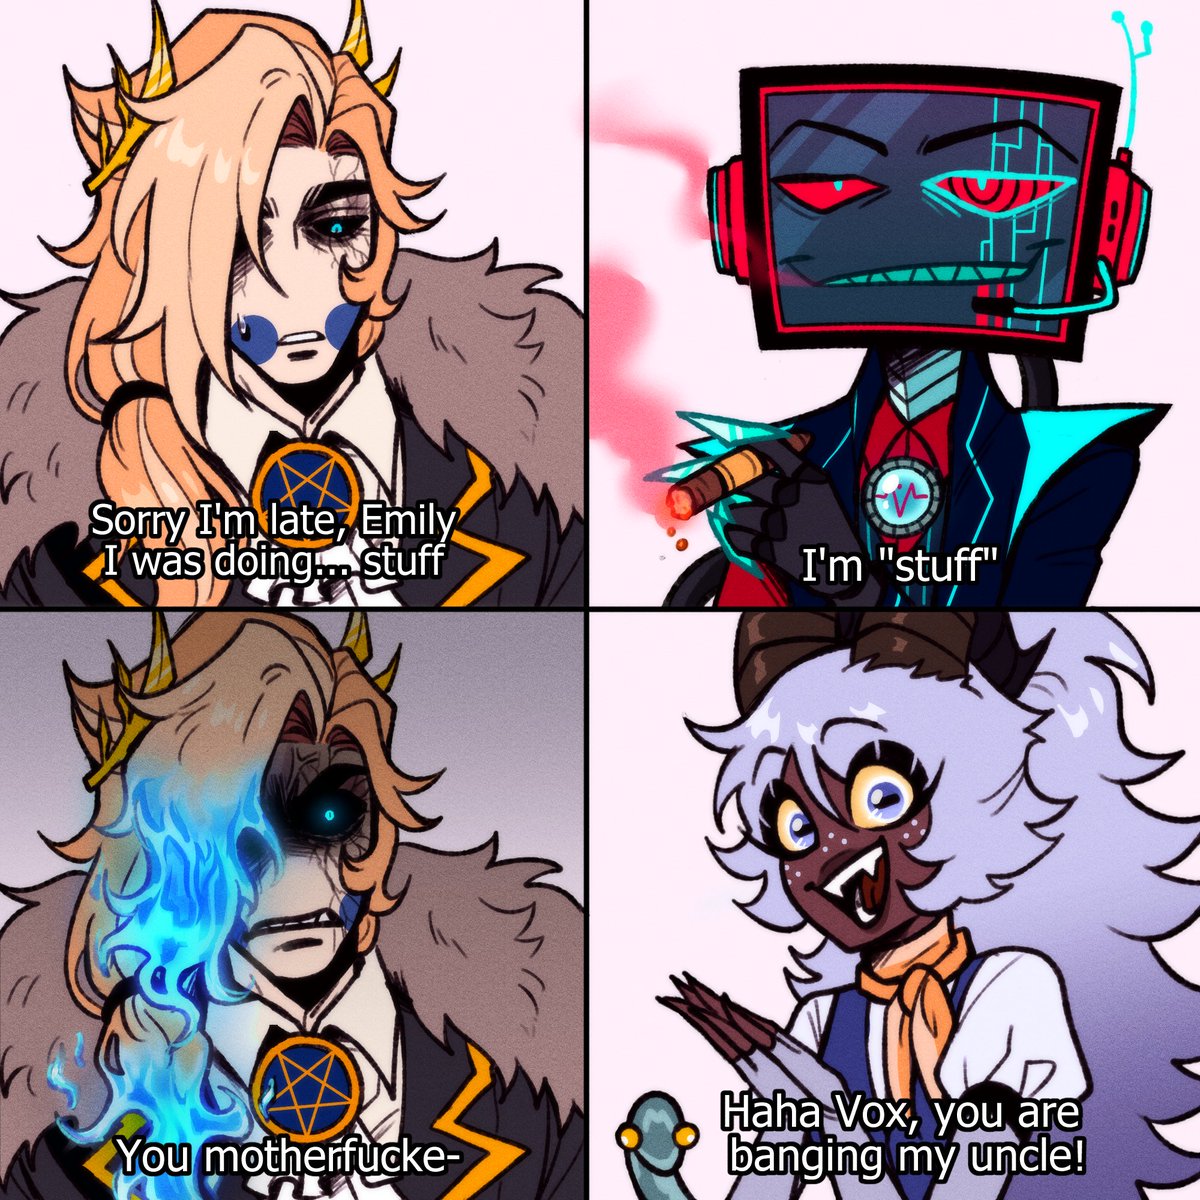 Michael sure is a busy guy #JusticeStatic #RuddyHotel #HazbinHotel #HazbinHotelVox #HazbinHotelMichael #HazbinHotelEmily